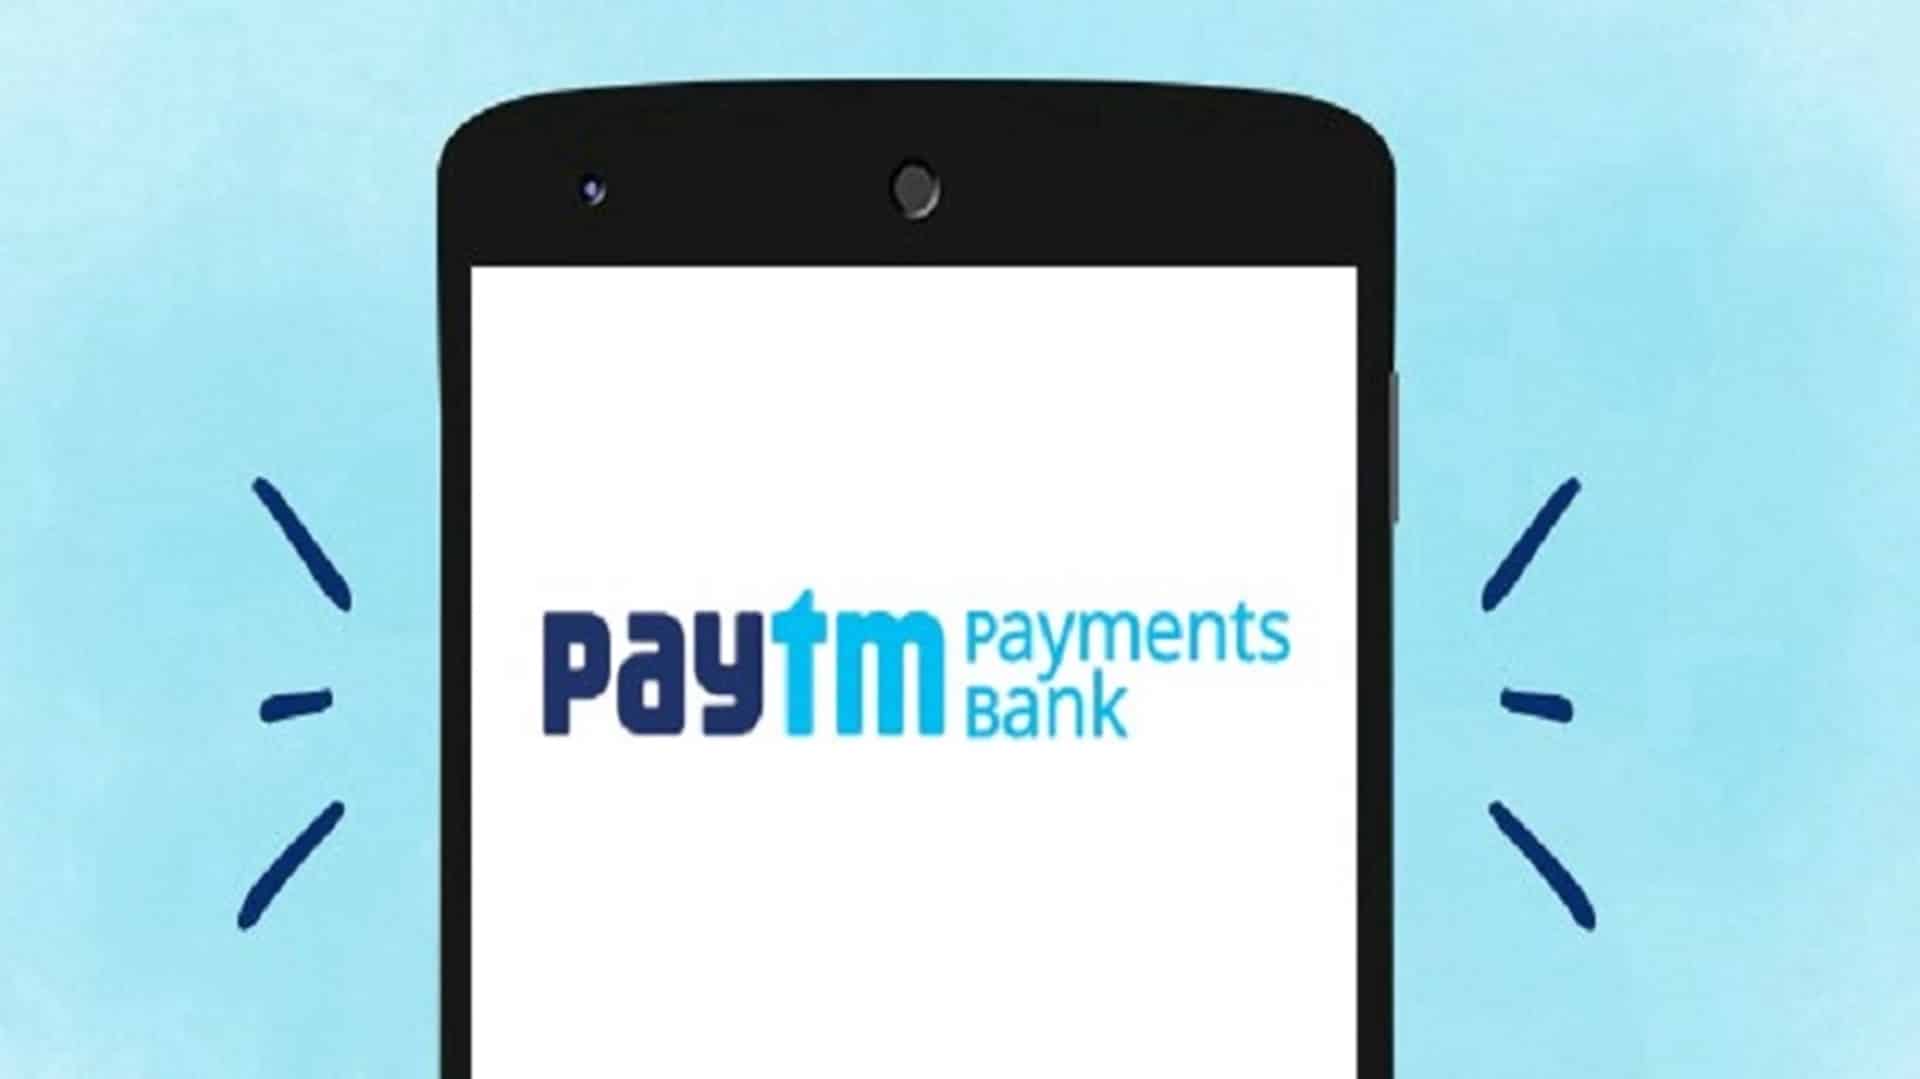 Ban on Paytm Bank to take new customers may be resolved in 3-5 months'